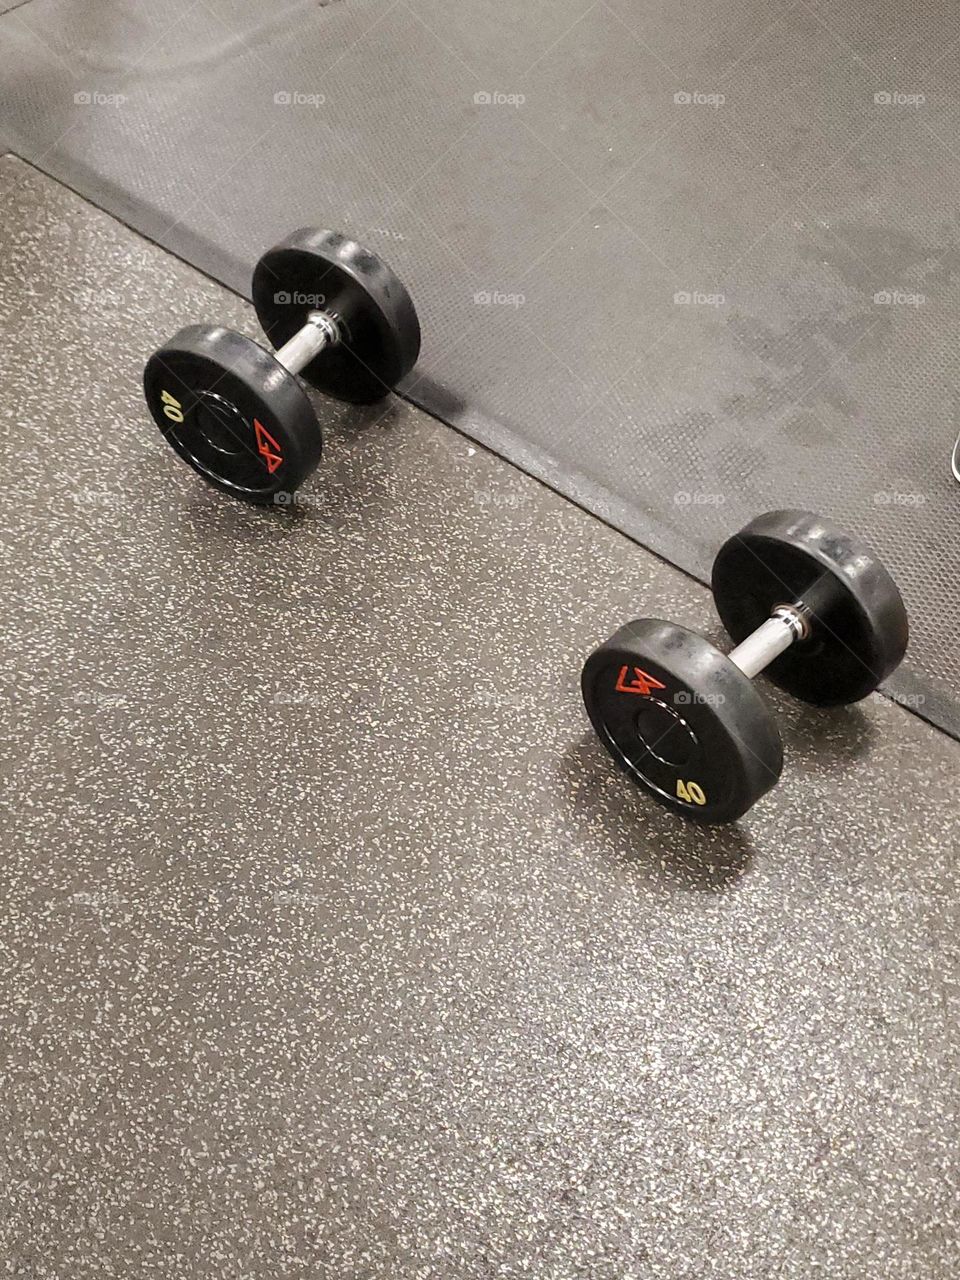 Forty Pound Dumbbells at Gym